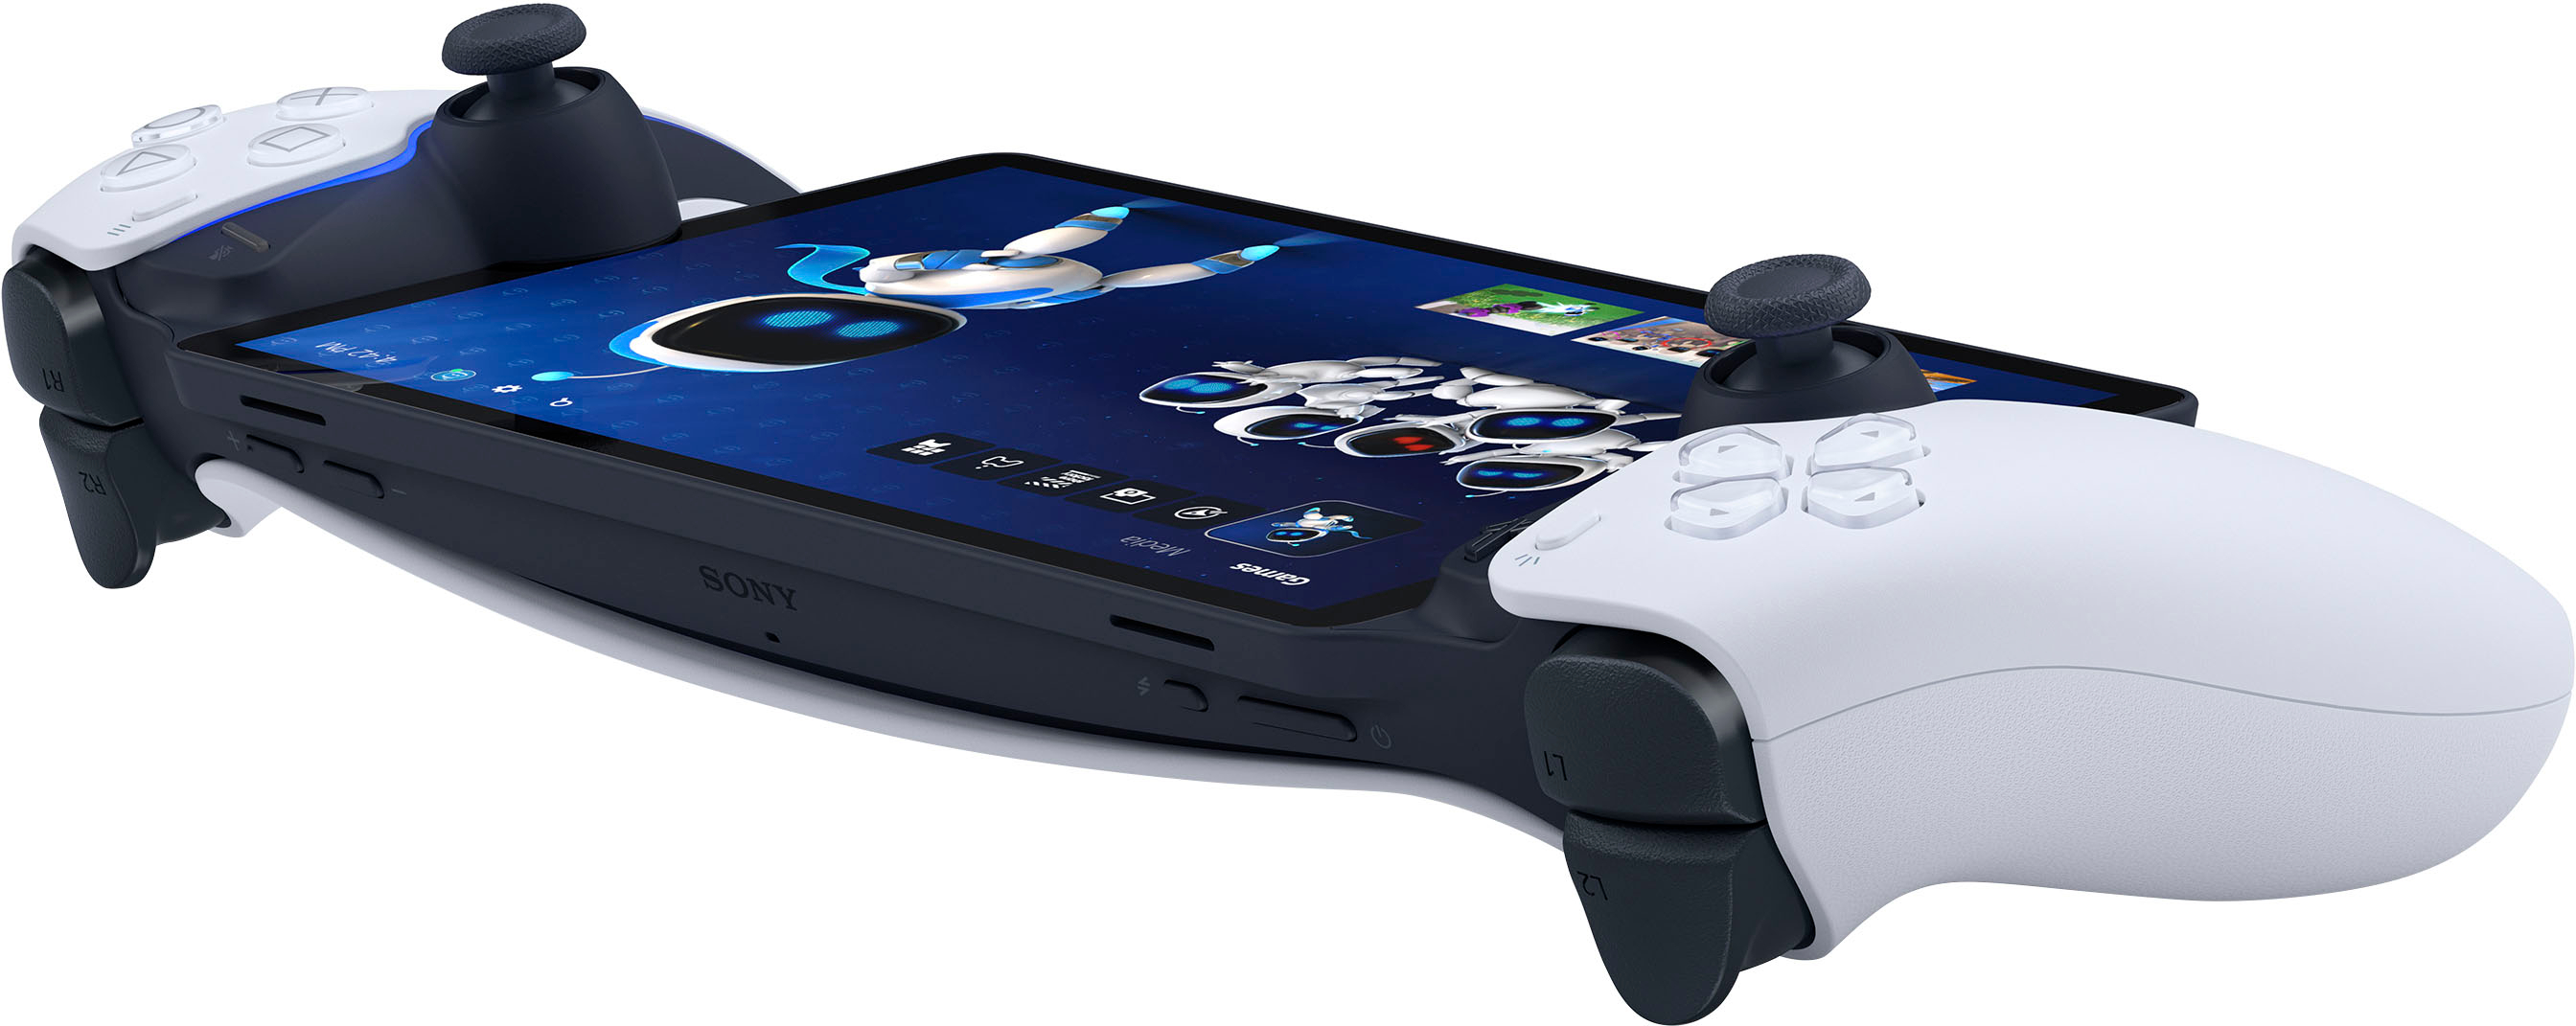 PlayStation's first Remote Play dedicated device, PlayStation